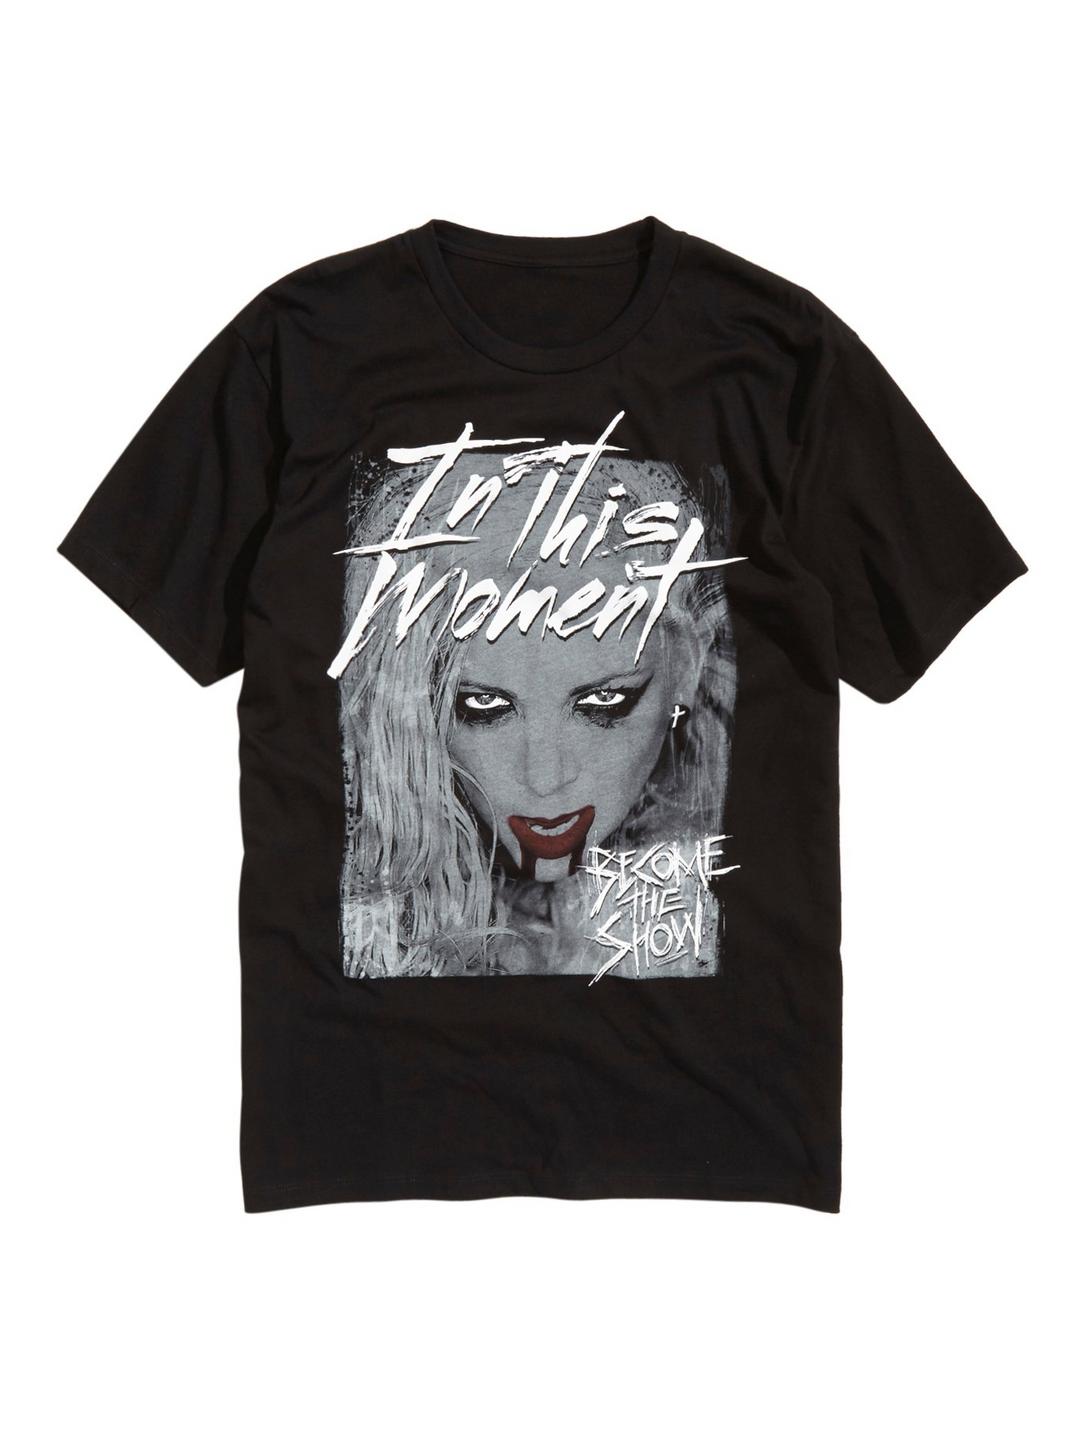 In this Moment Become The Show T-Shirt, BLACK, hi-res